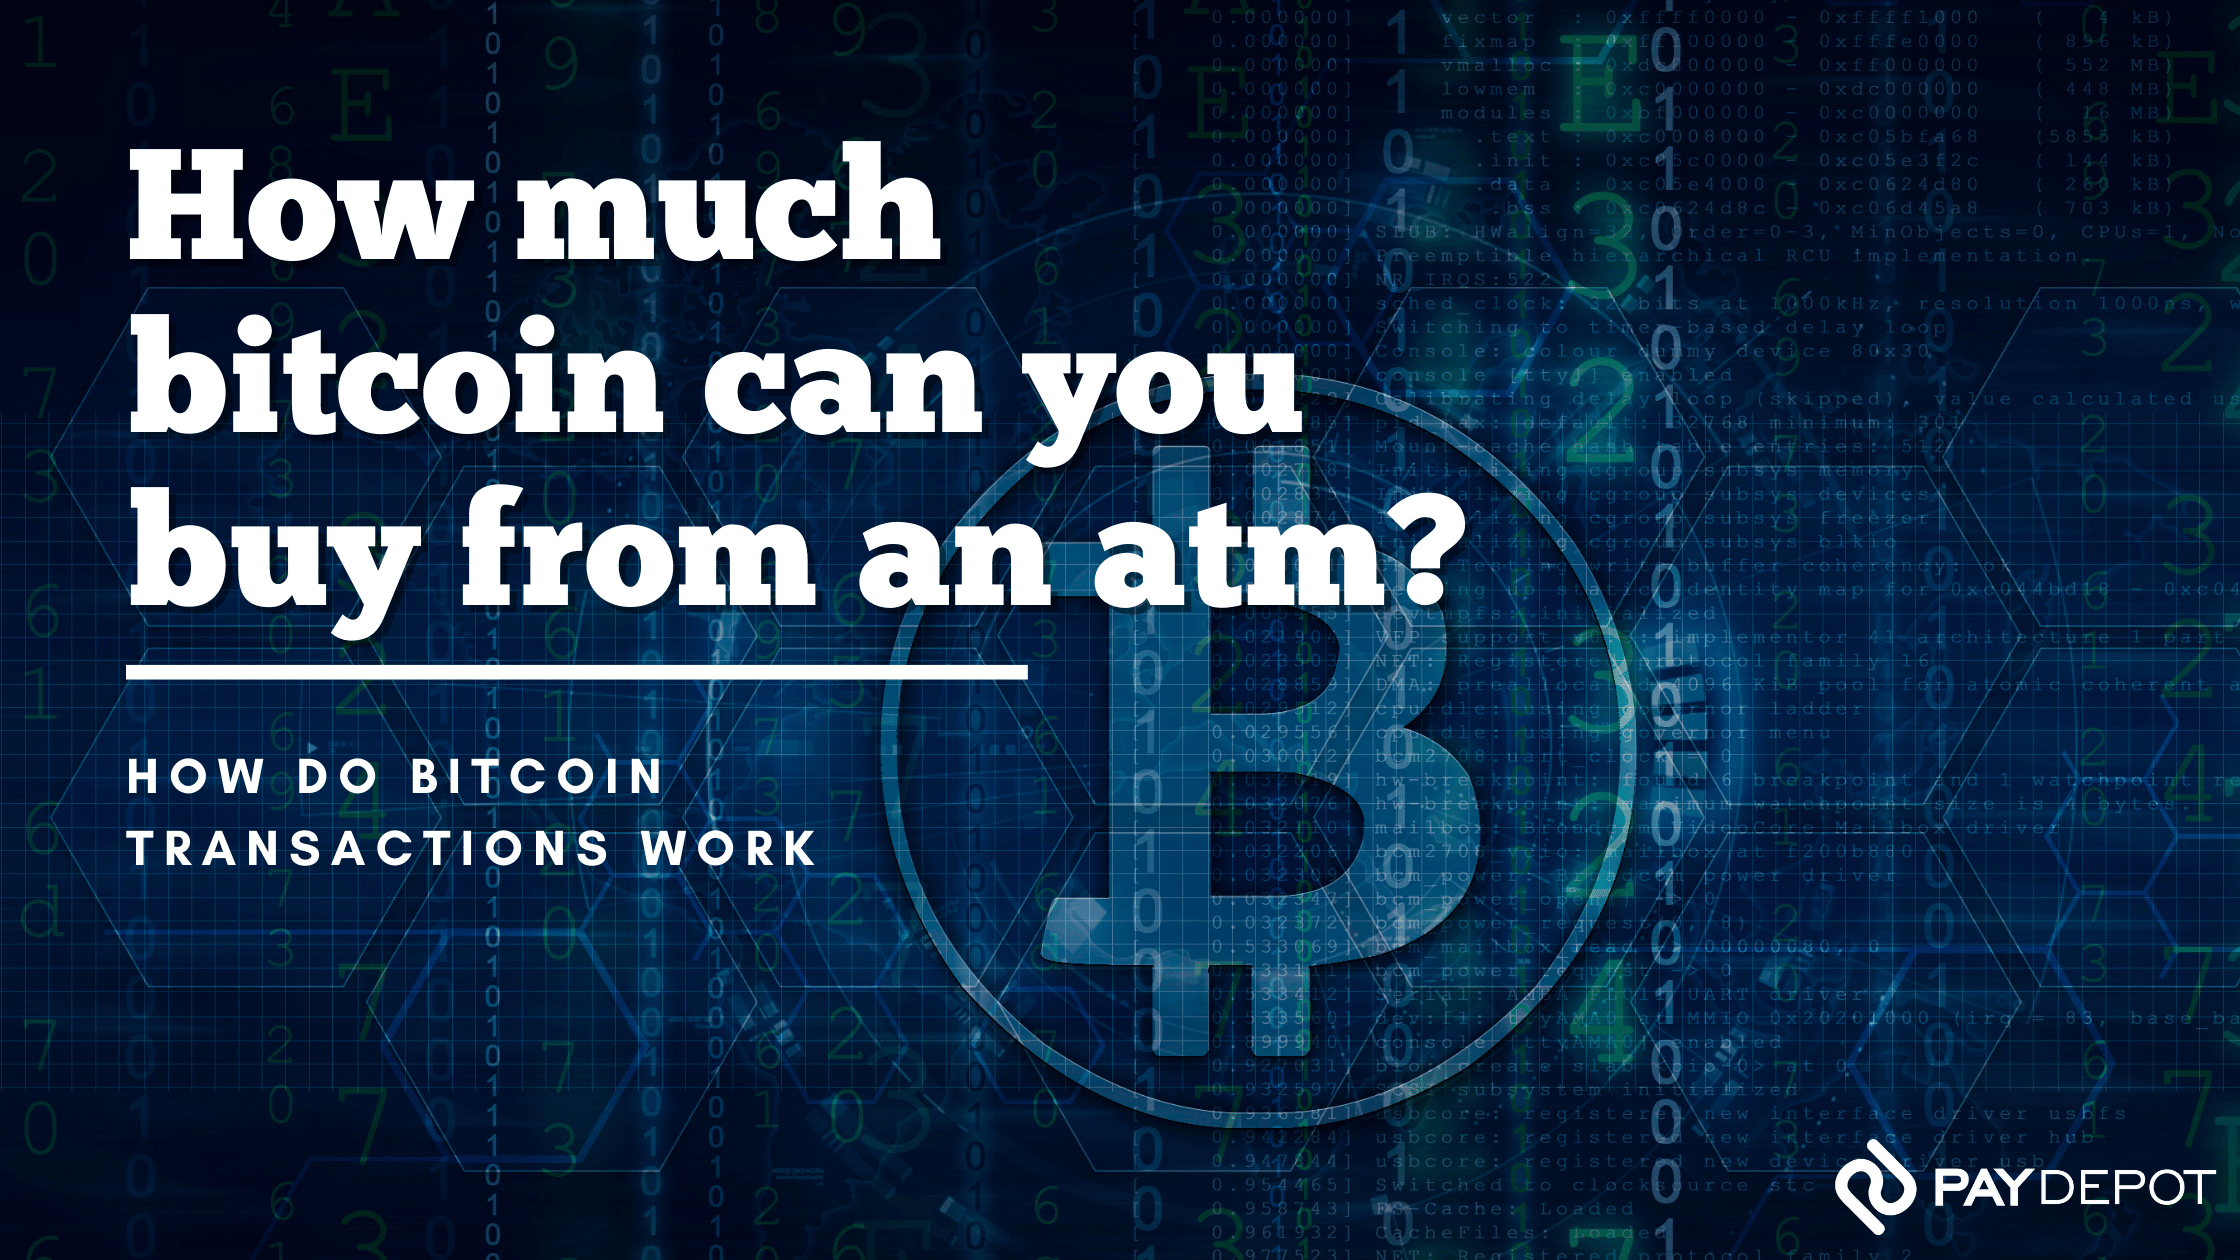 How Much Bitcoin Can You Buy from an ATM?